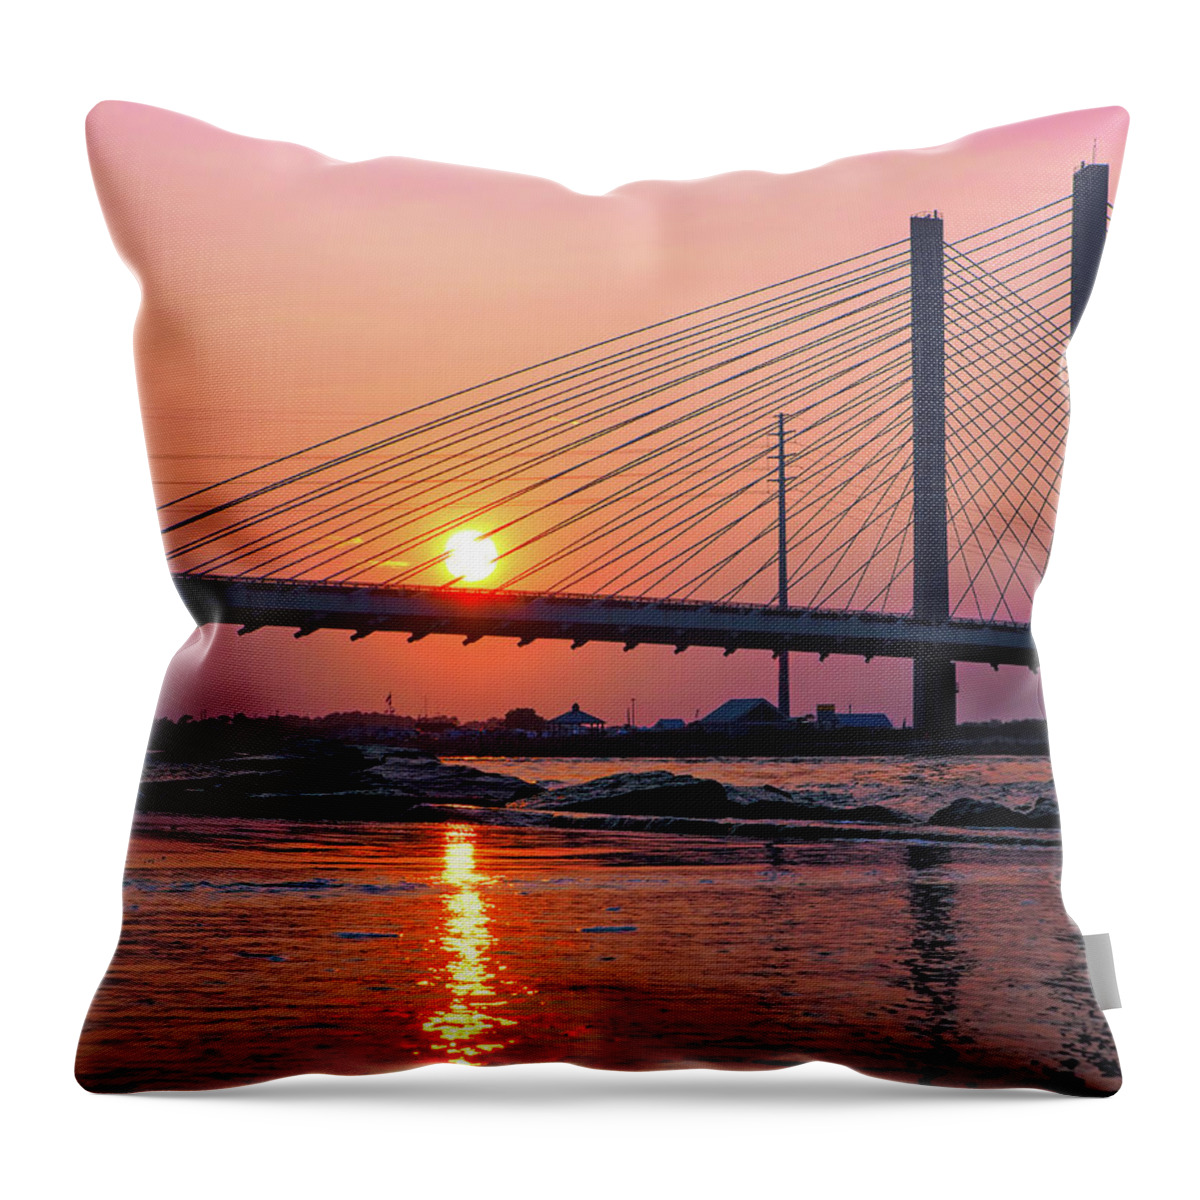 Sunset Throw Pillow featuring the photograph Indian River Bridge Magenta Reflections by Bill Swartwout